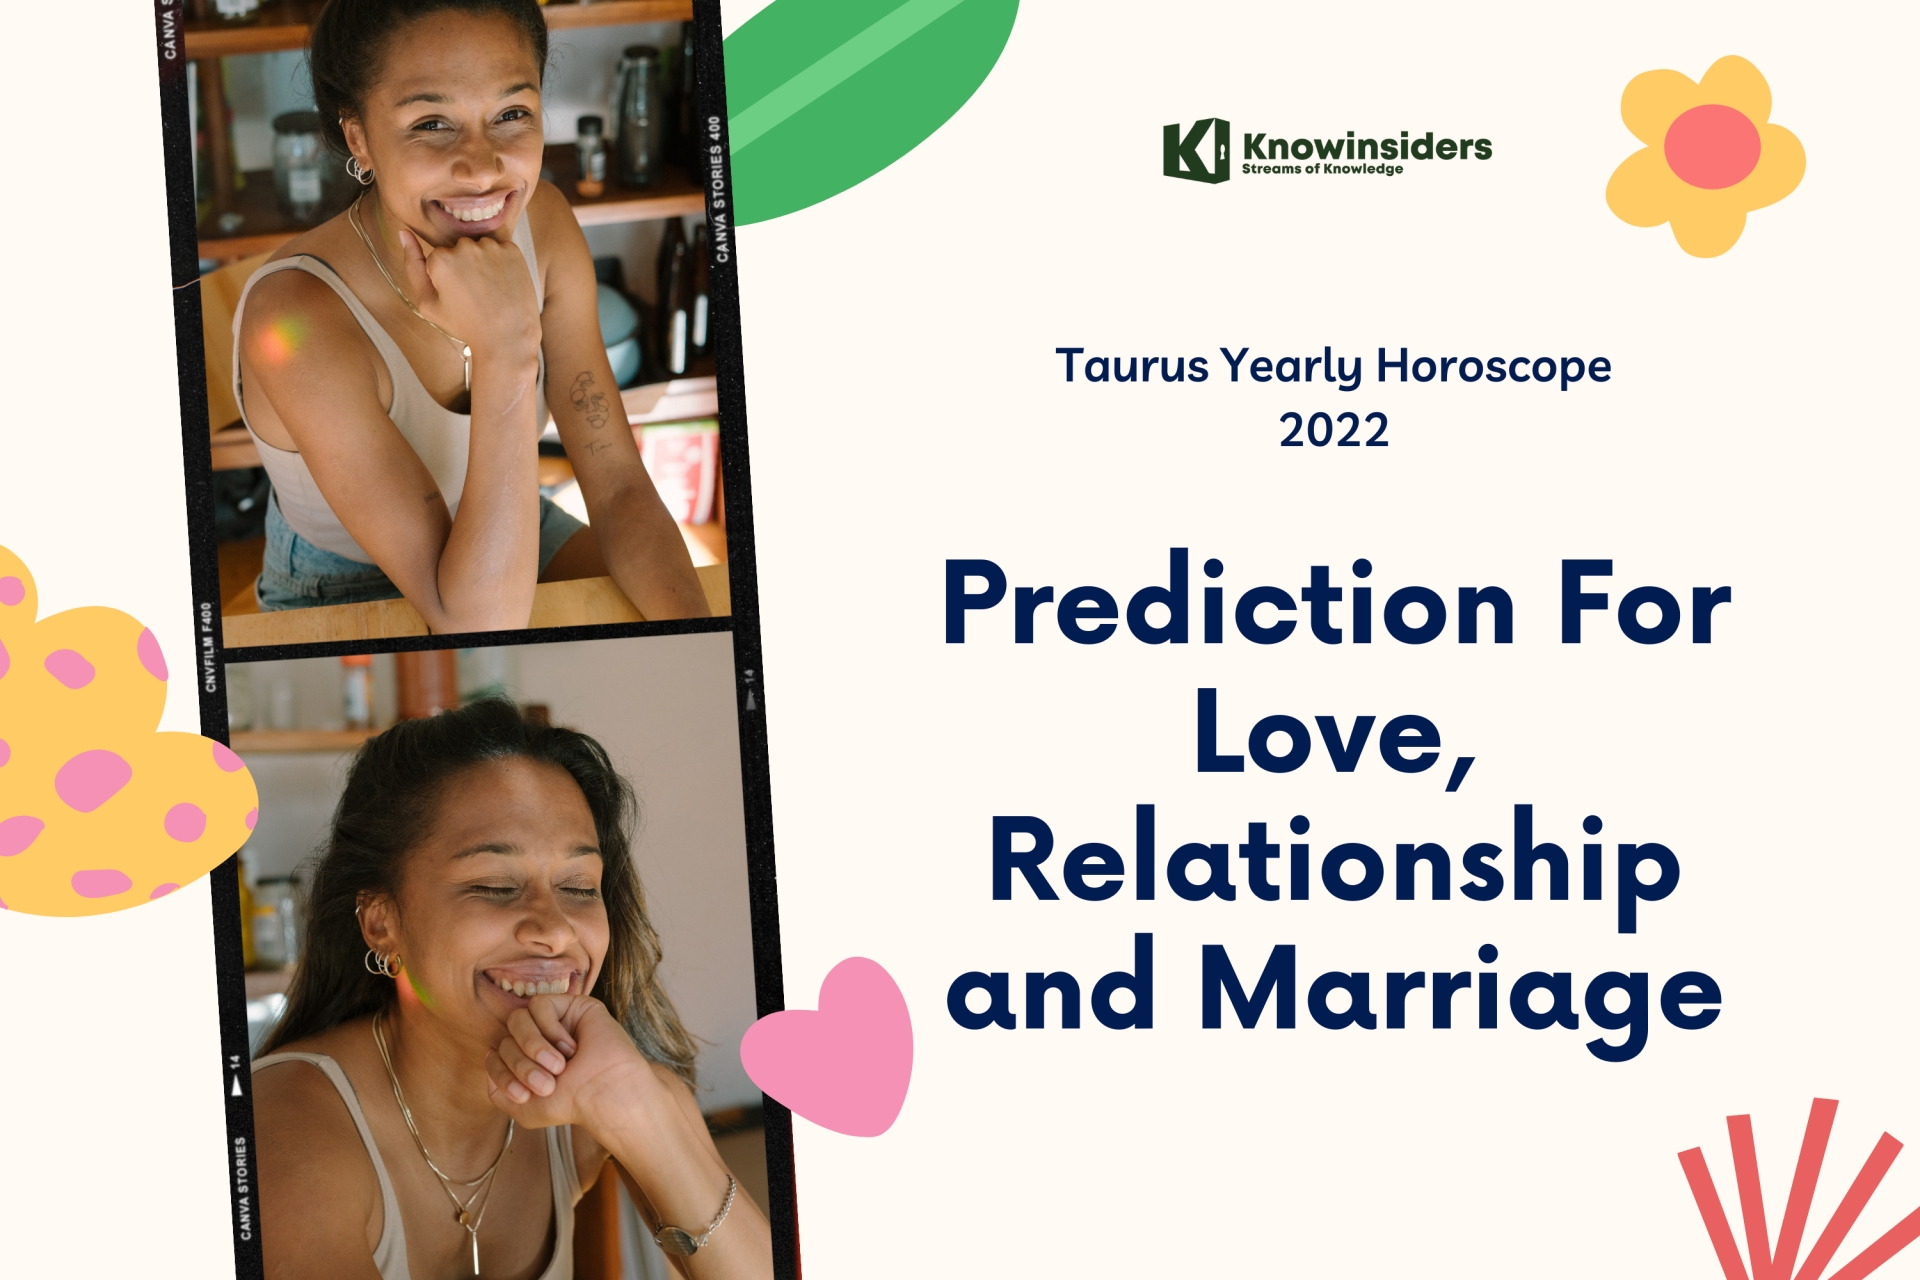 taurus yearly horoscope 2022 prediction for love relationship and marriage